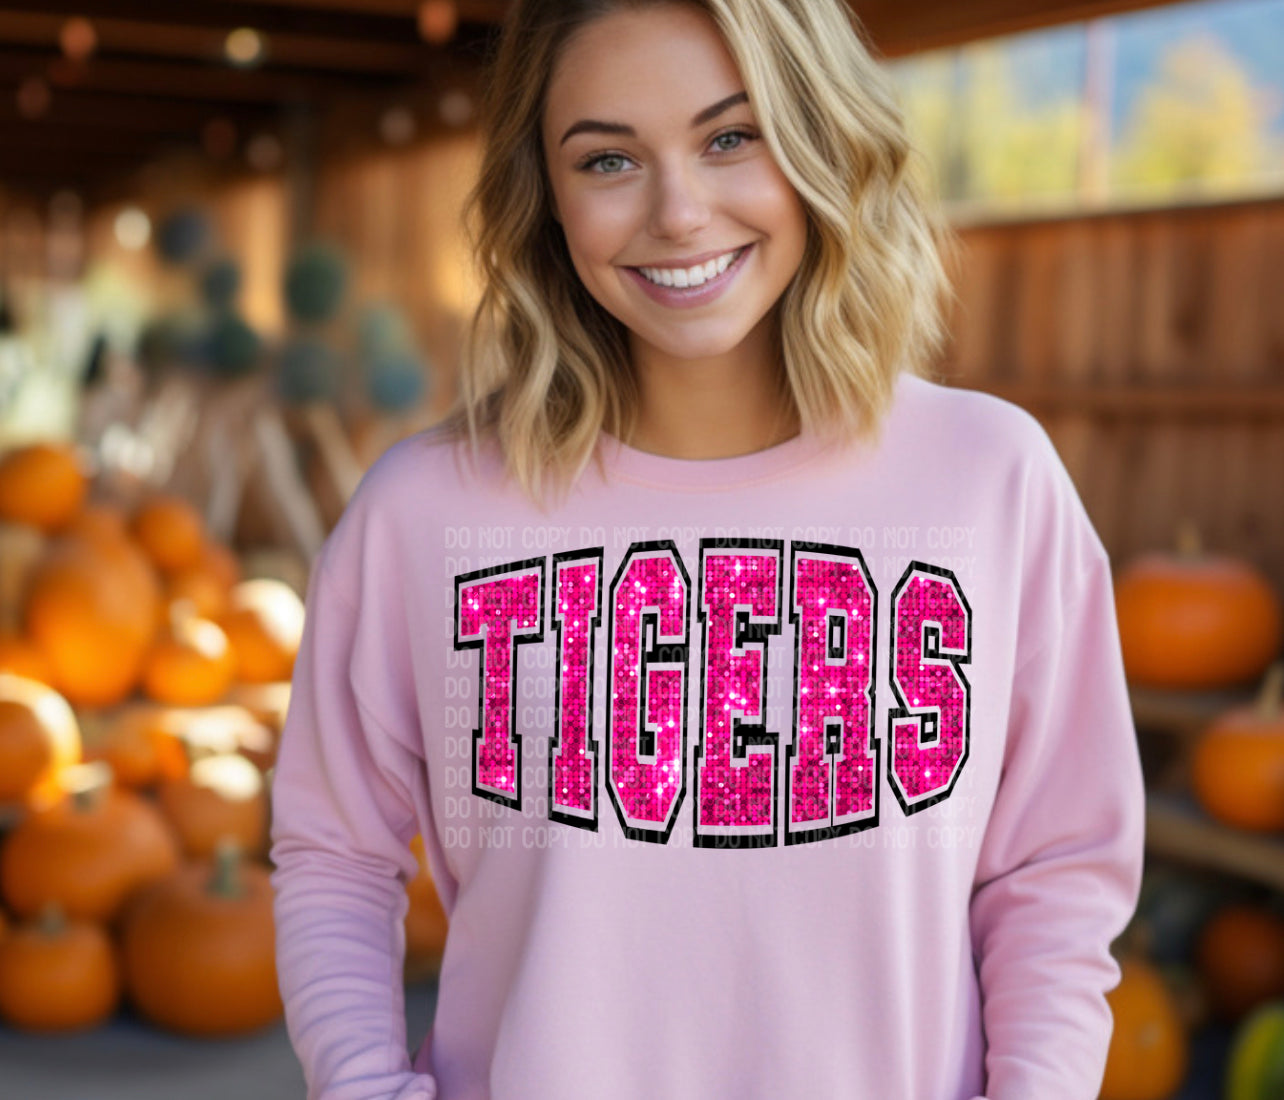 Tigers (no pinkout) (Black Outline)